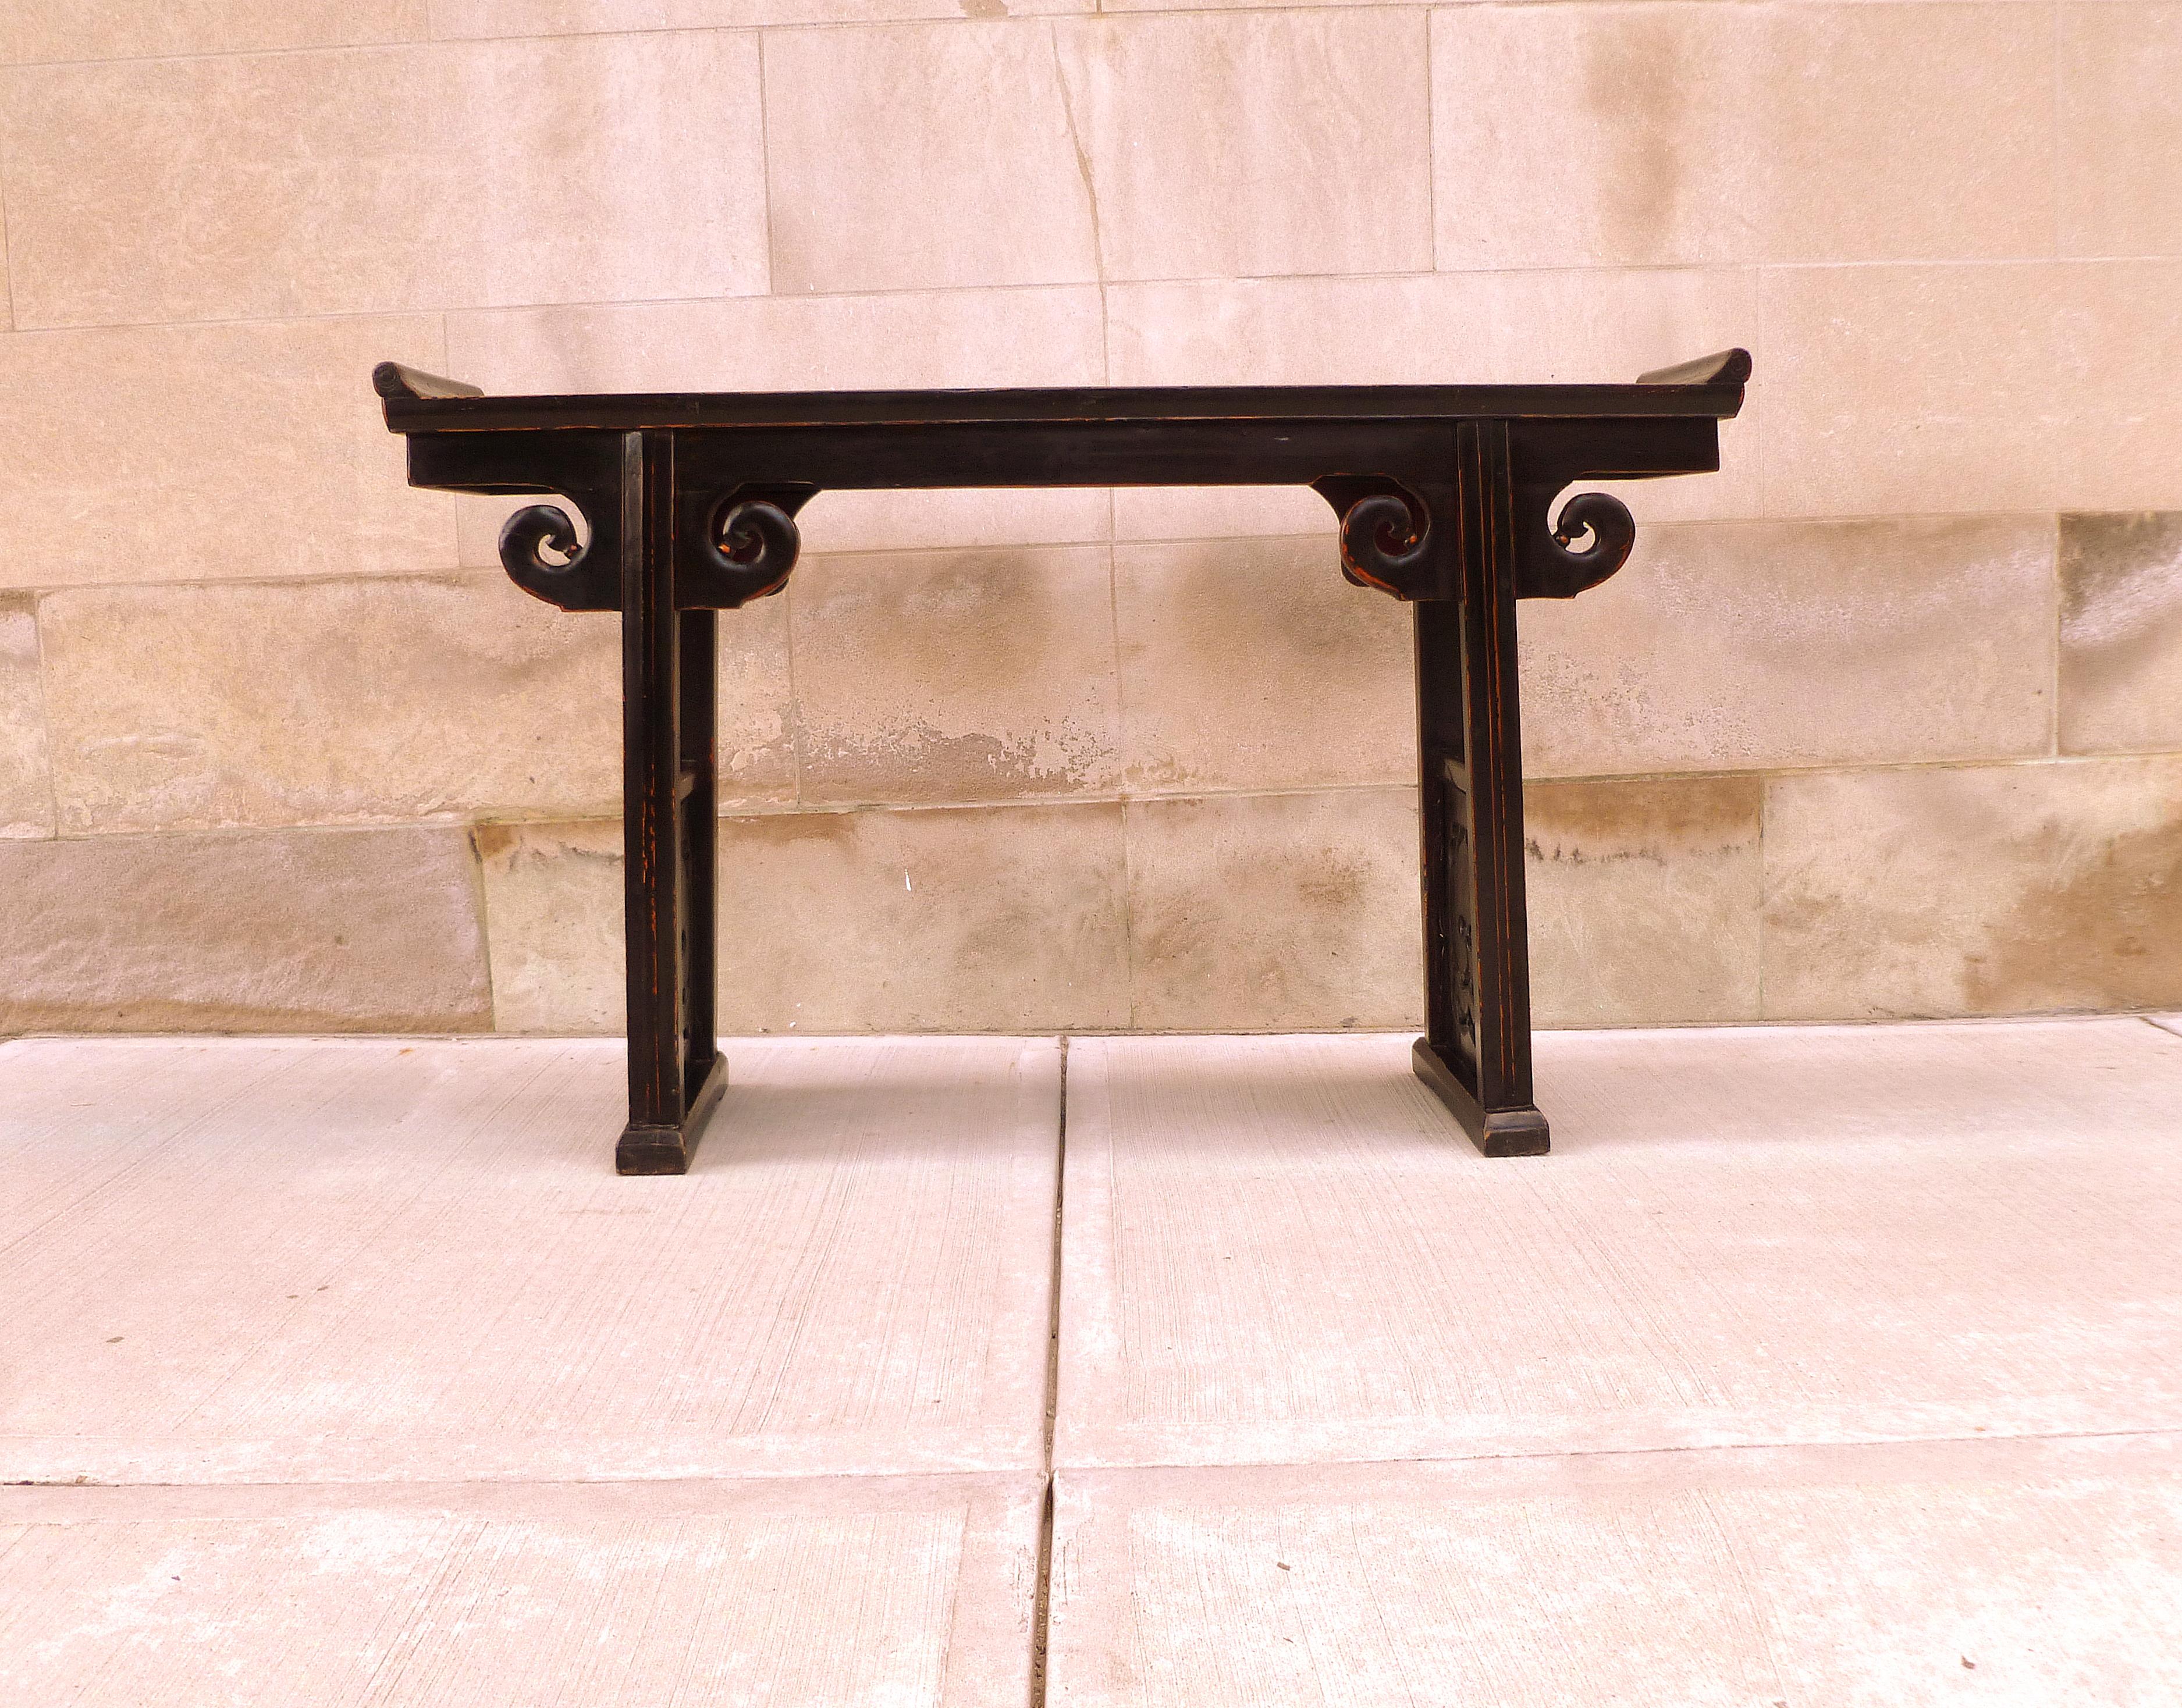 Black lacquer altar table with everted flangers with auspicious design pierce carving side panels.